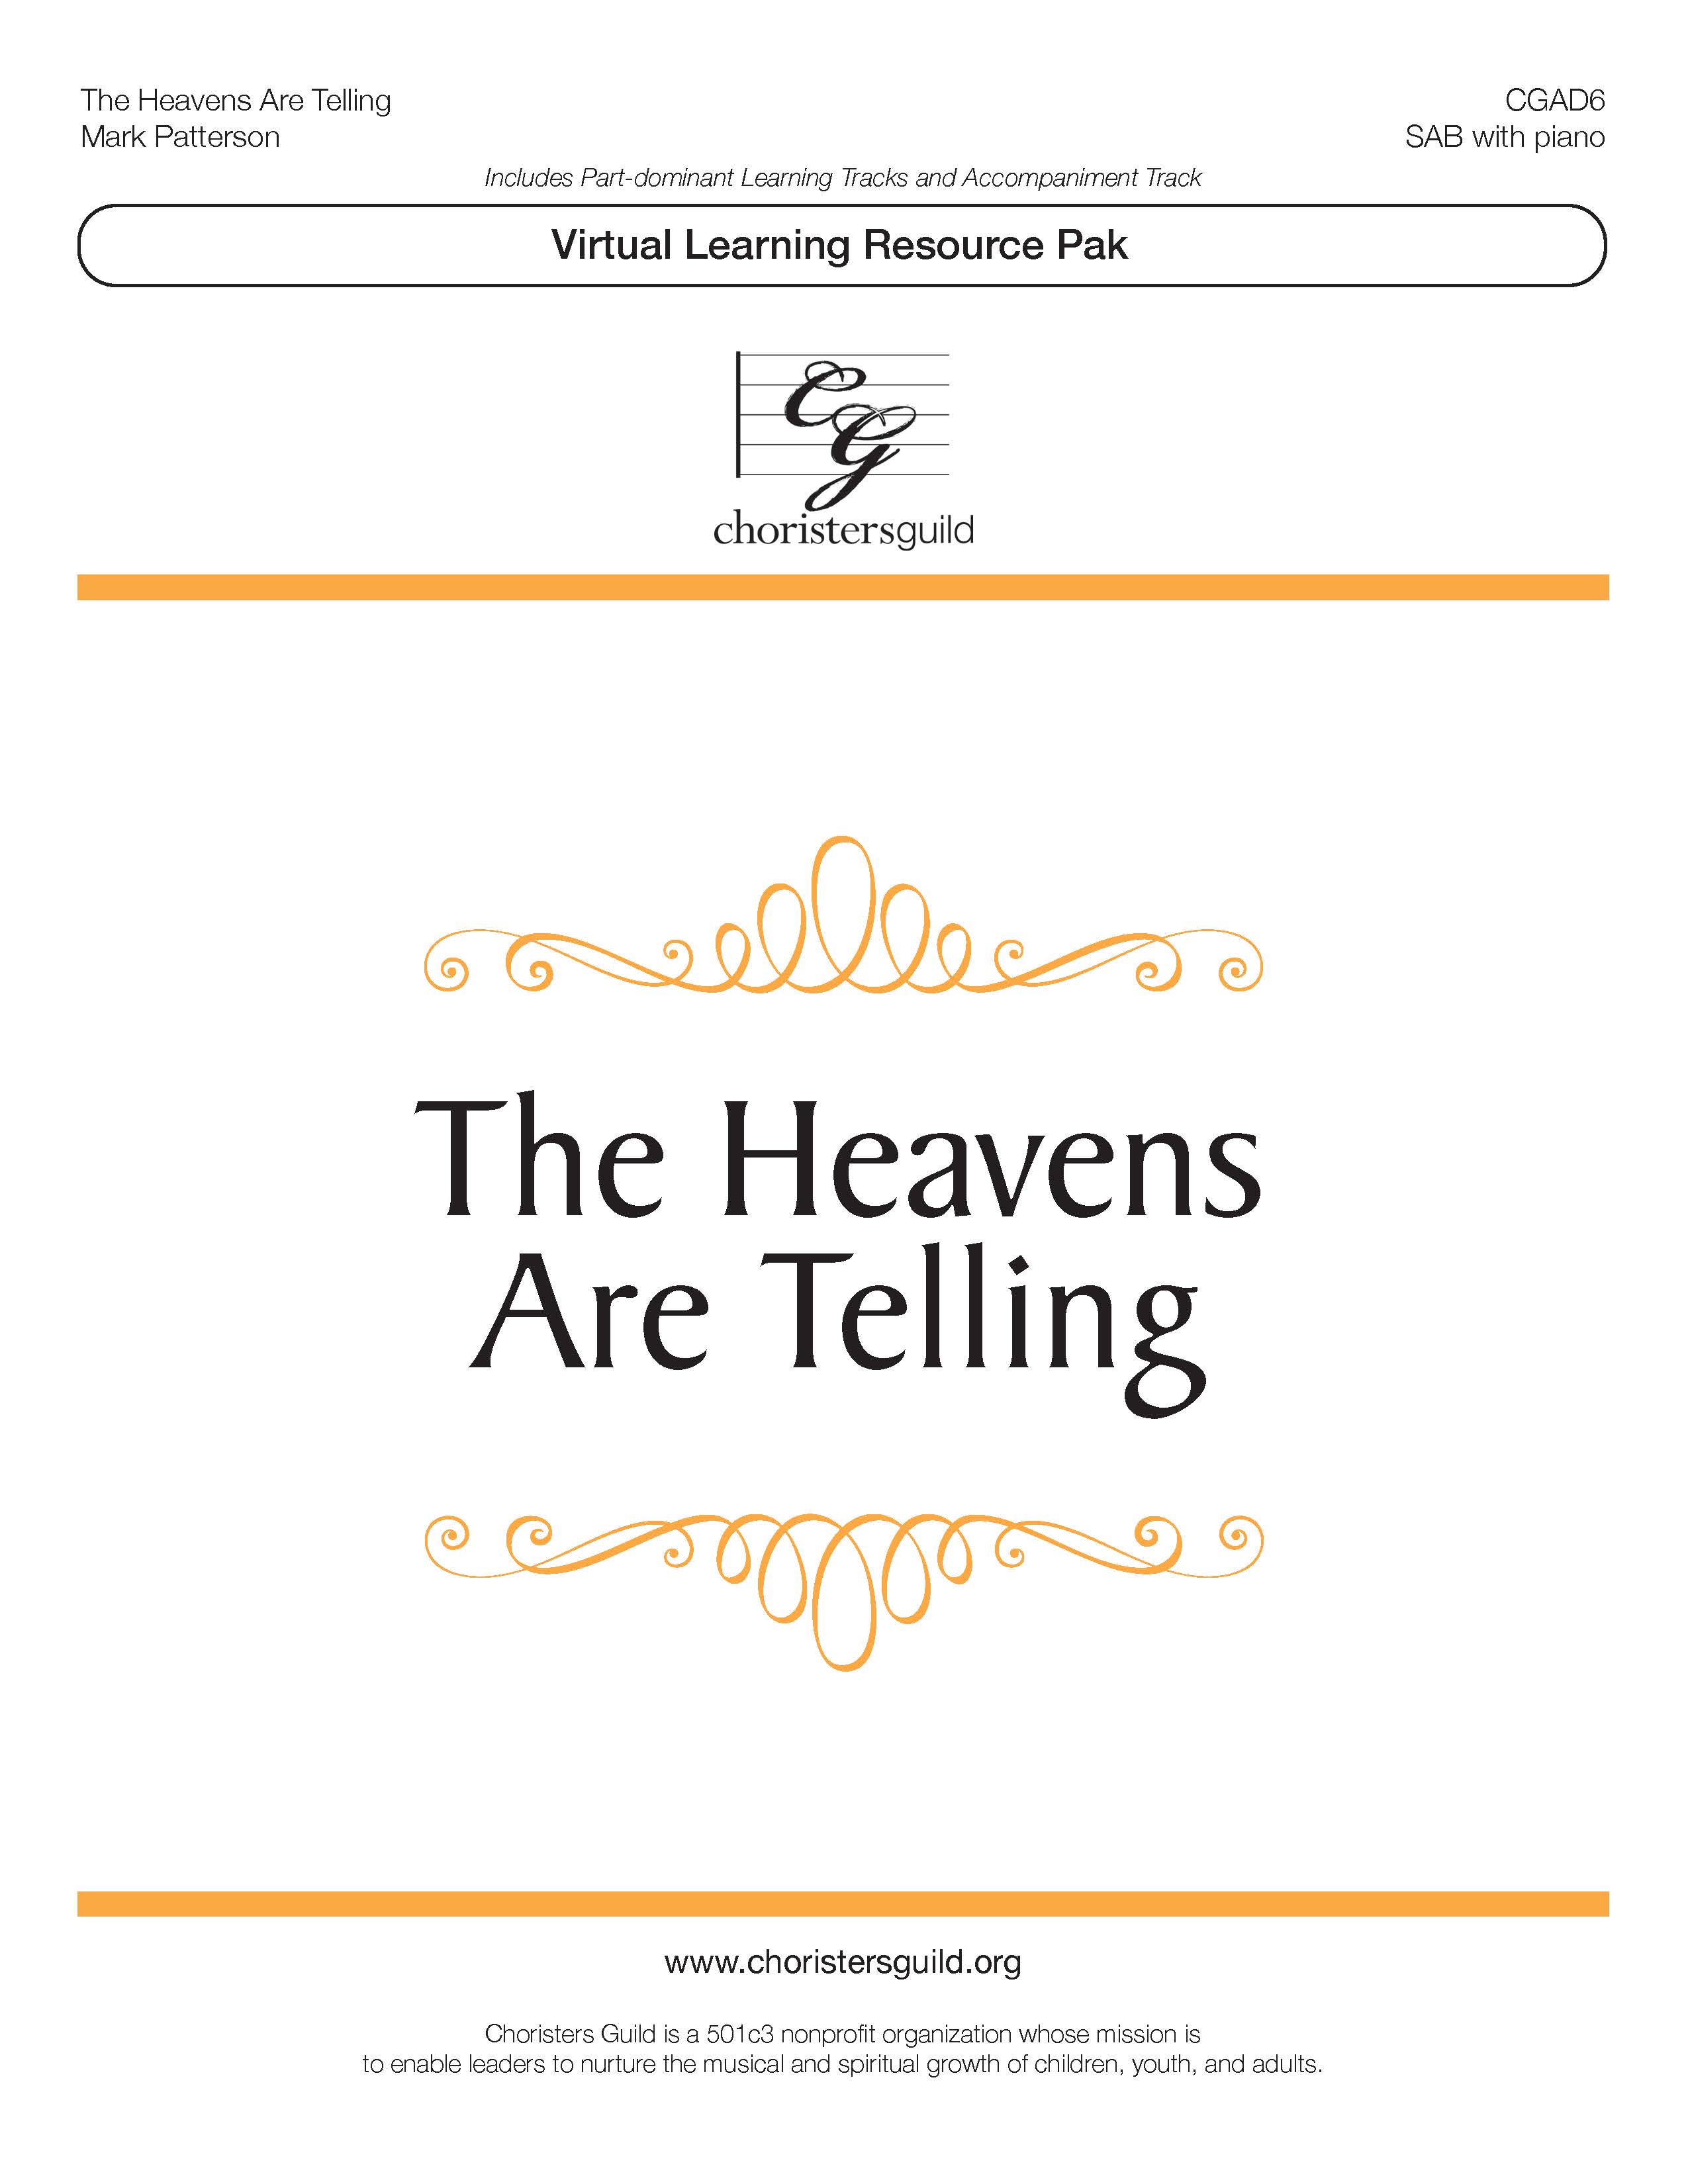 The Heavens are Telling  (Virtual Learning Resource Pak) - SAB